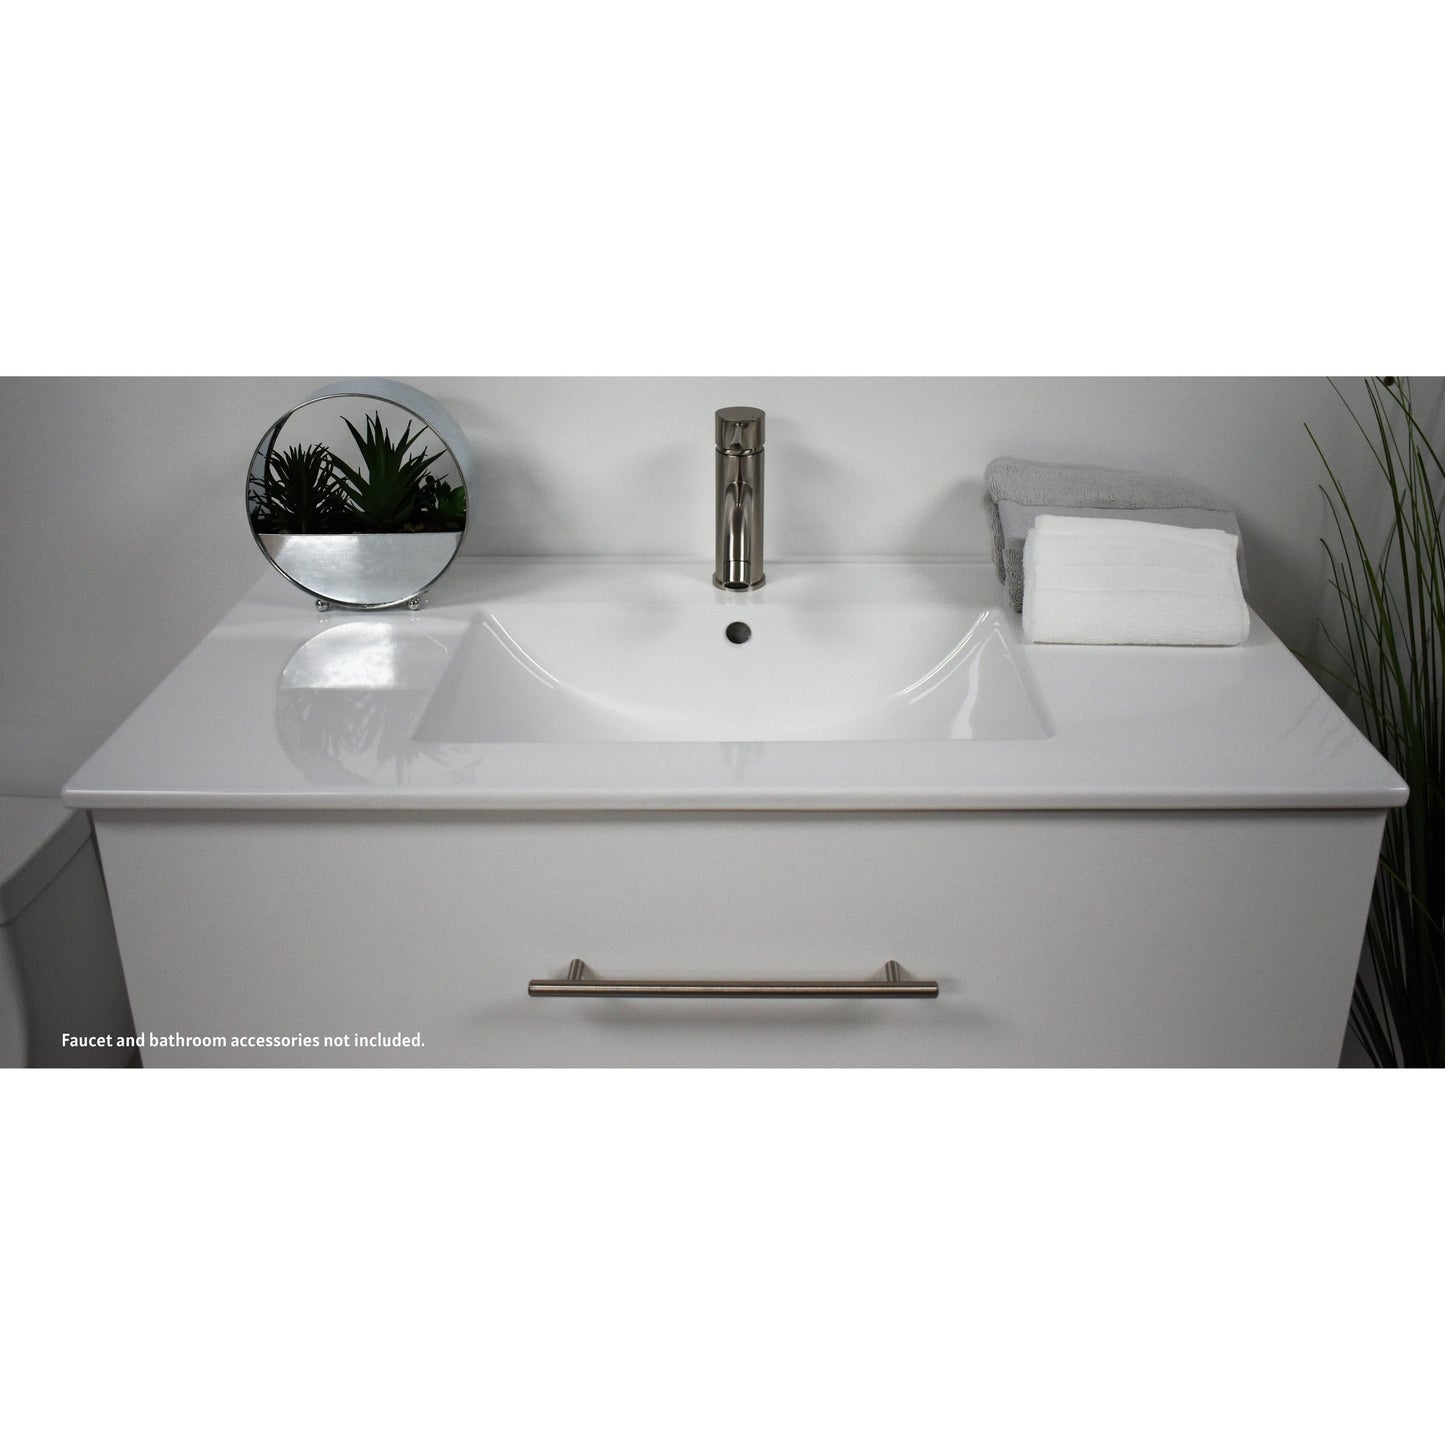 Volpa USA Napa 36" Glossy White Wall-Mounted Floating Modern Bathroom Vanity With Integrated Ceramic Top and Satin Nickel Round Handles